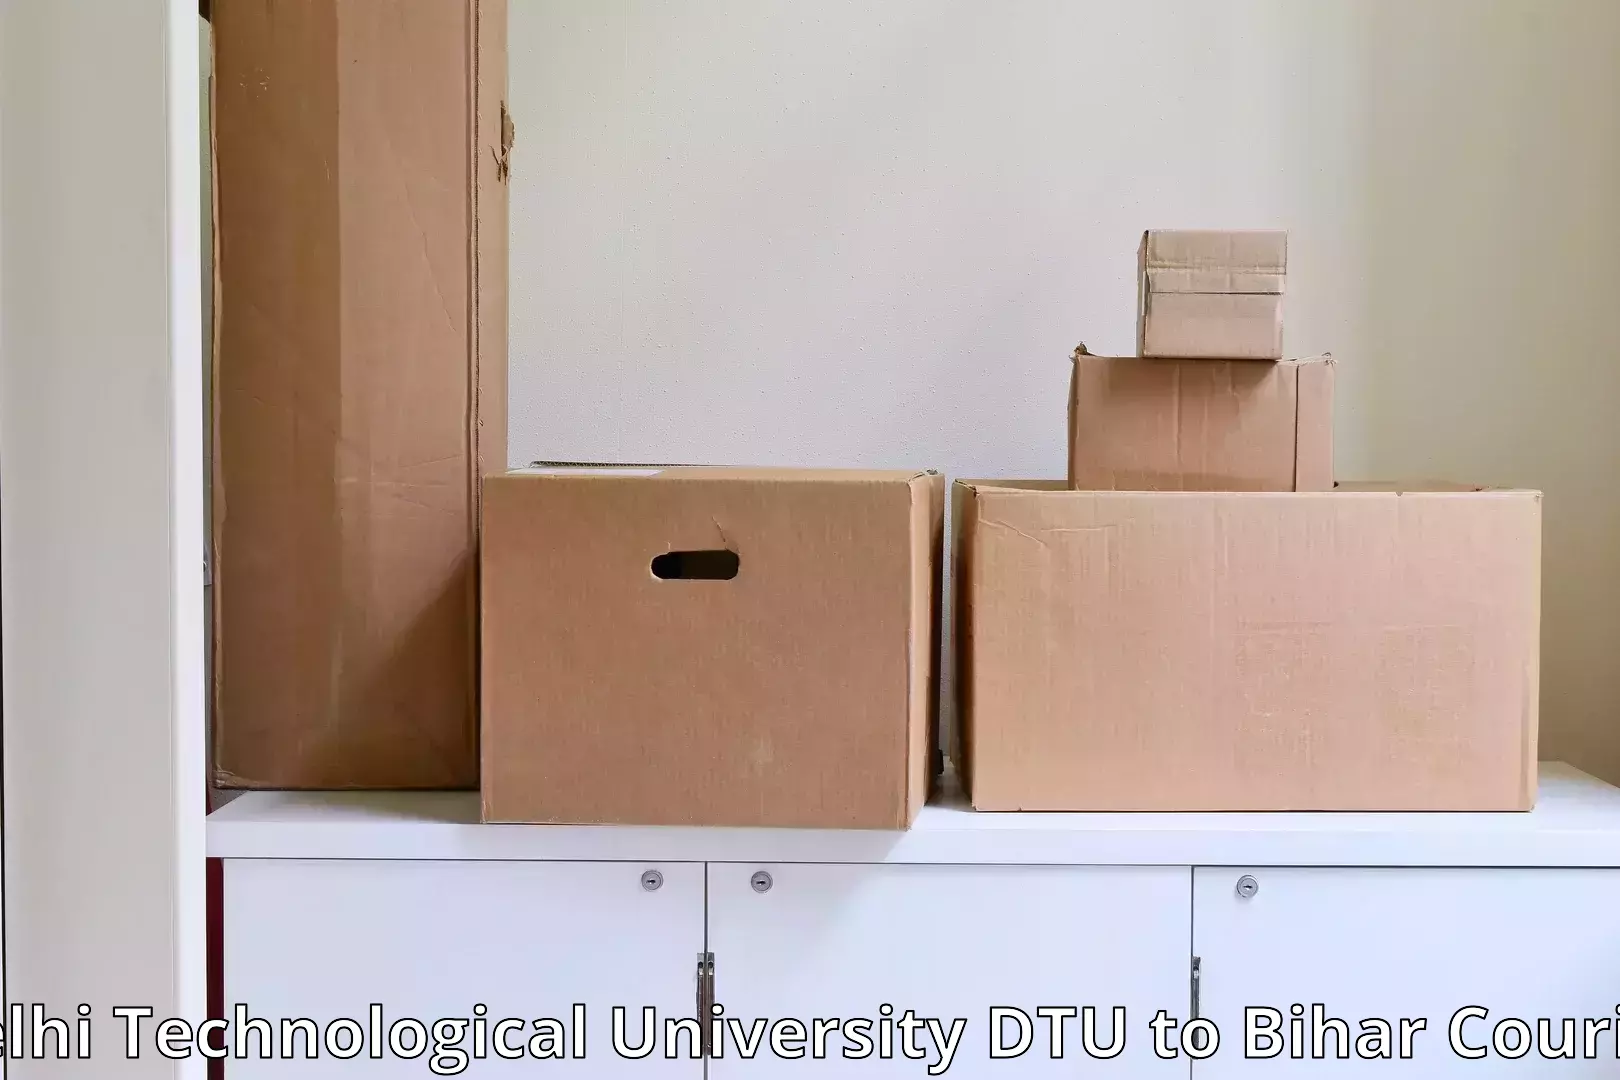 Quality moving services Delhi Technological University DTU to IIT Patna